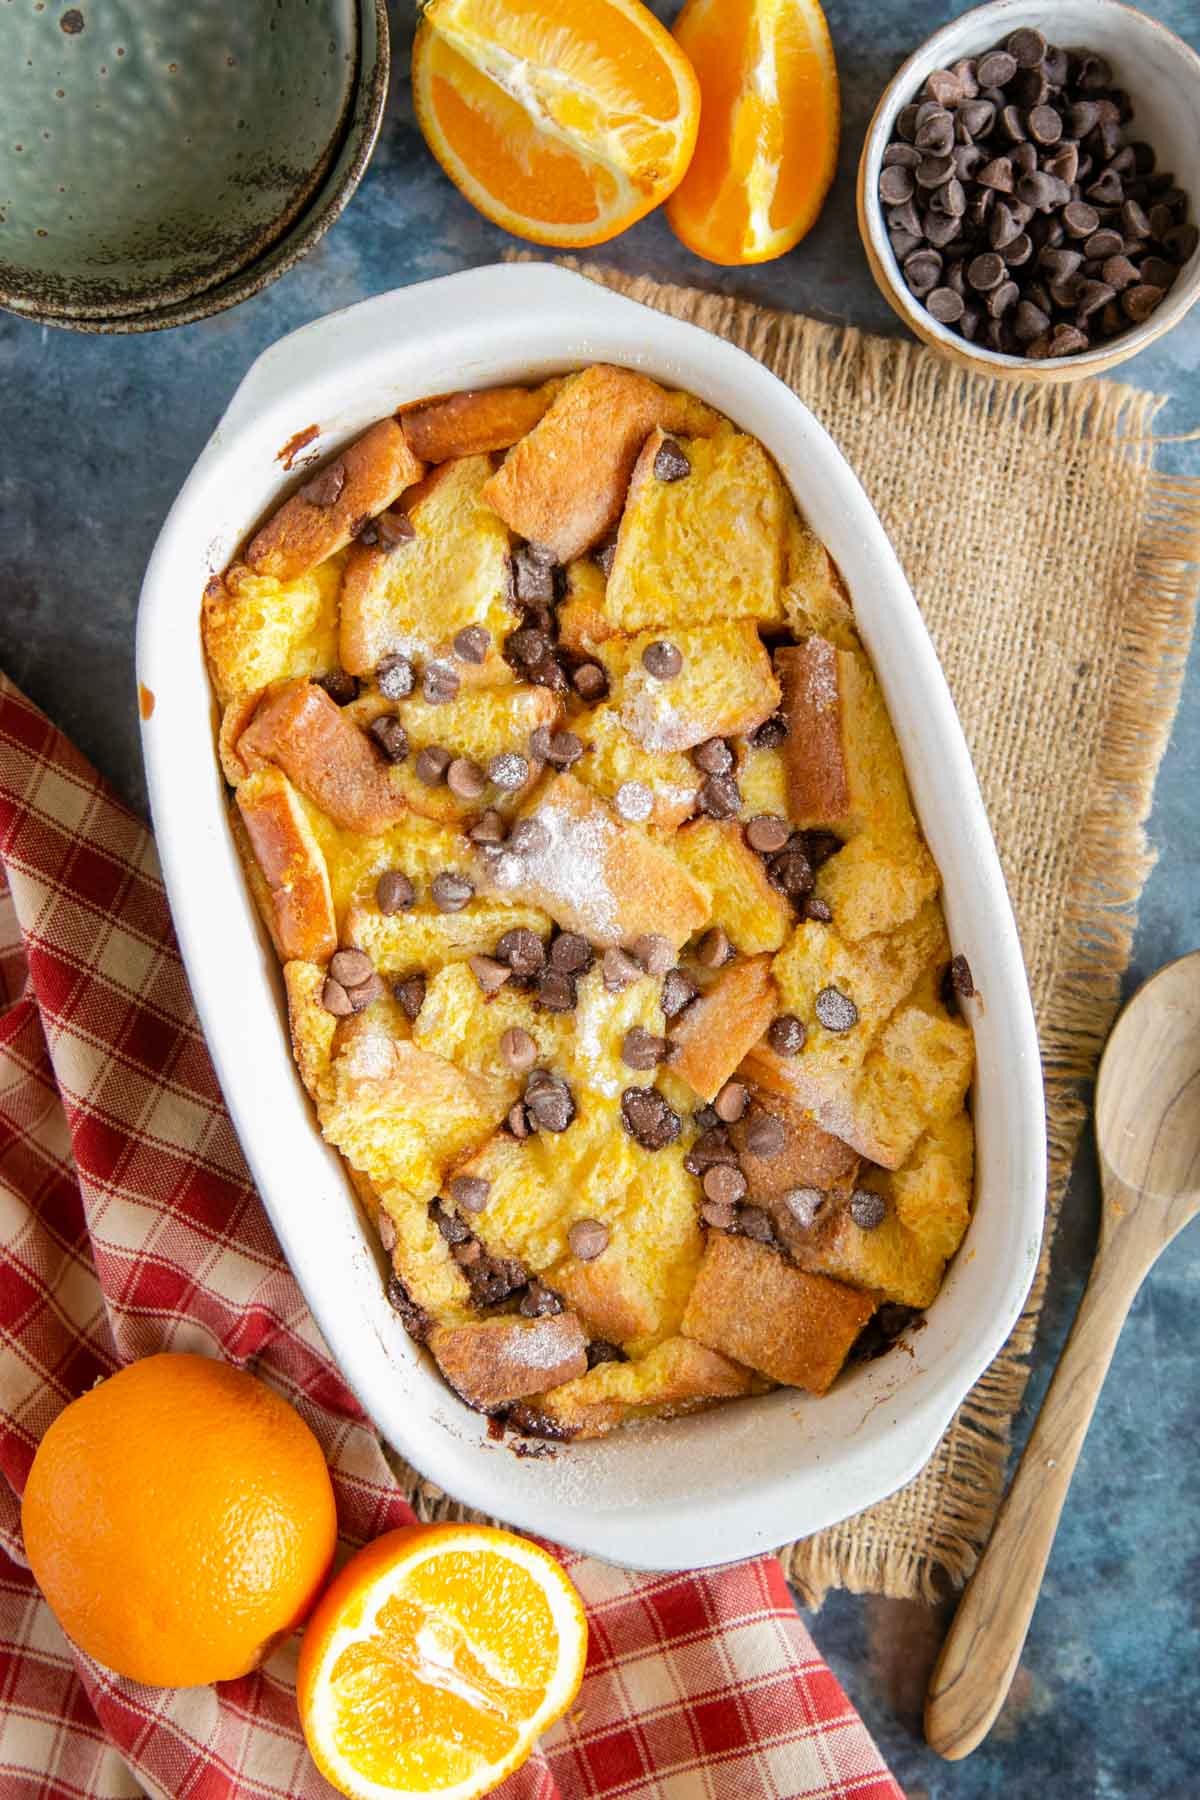 Chocolate orange bread and butter pudding from above, with cut oranges and chocolate chips.